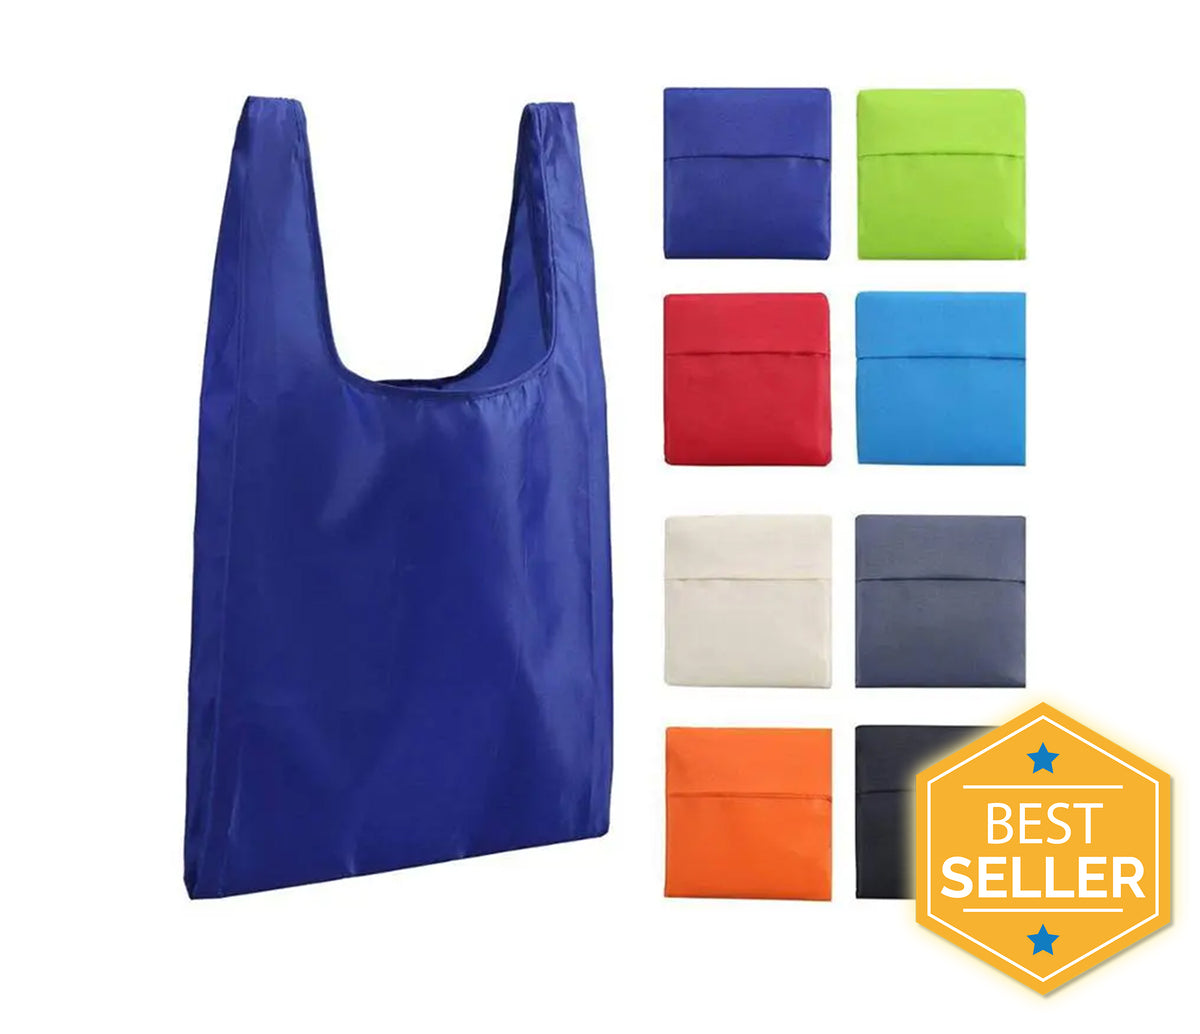 Foldable Neon Recycle Shopping Bag